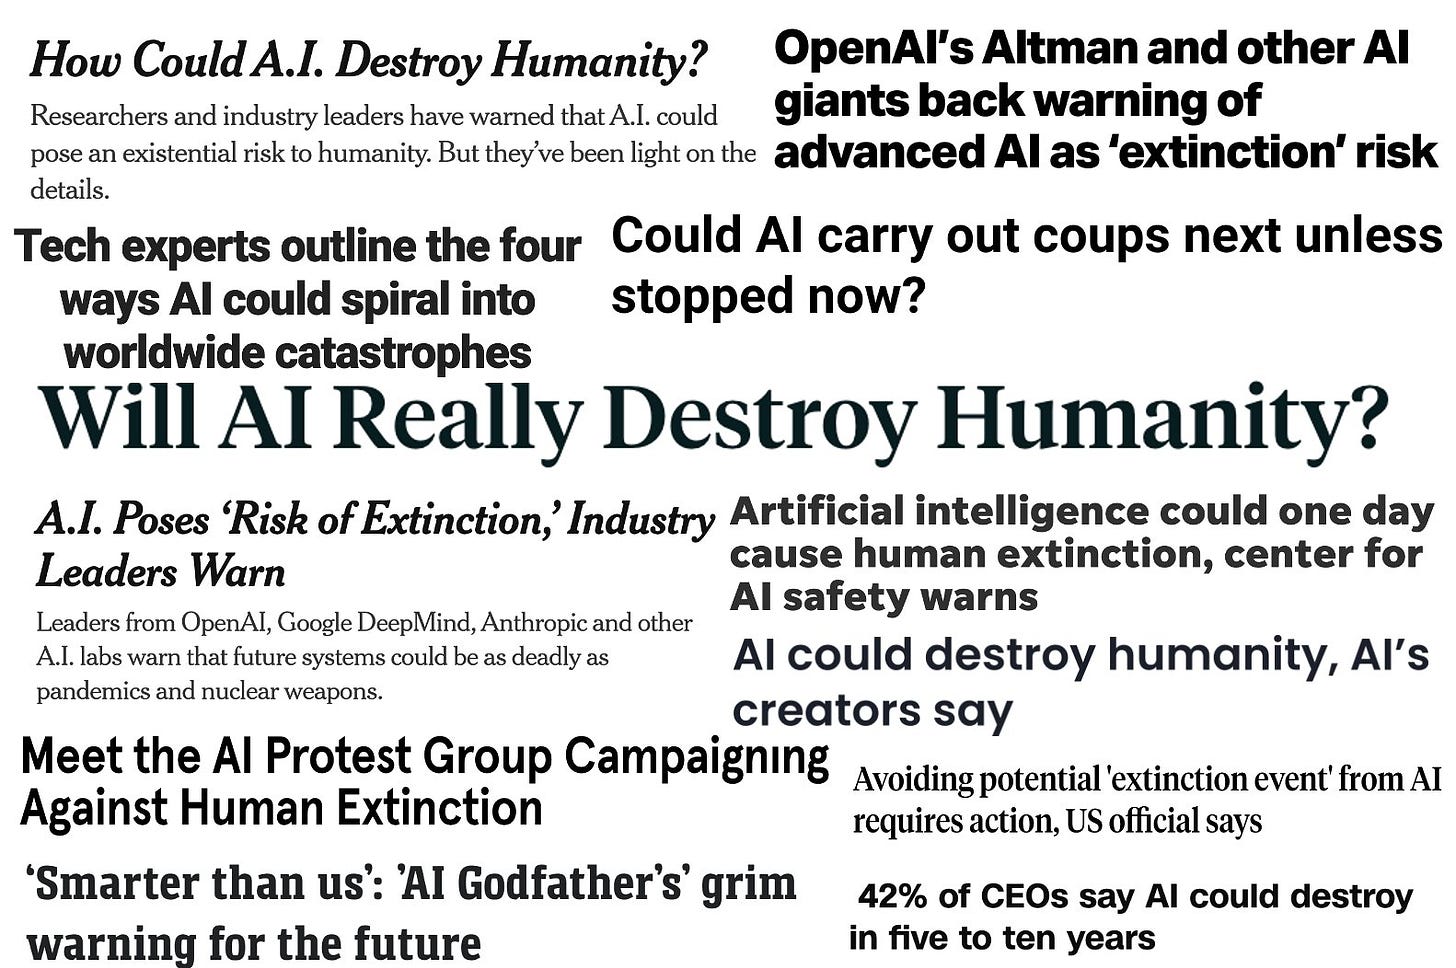 collection of newspaper headlines reading: How Could A.I. Destroy Humanity? OpenAl's Altman and other Al Researchers and industry leaders have warned that A I could giants back warning of pose an existential risk to humanity. But they've been light on the advanced Al as 'extinction' risk details. Tech experts outline the four Could Al carry out coups next unless ways Al could spiral into stopped now? worldwide catastrophes Will AI Really Destroy Humanity? A.I. Poses 'Risk of Extinction, Industry Artificial intelligence could one day cause human extinction, center for Leaders Warn Leaders from OpenAl,Goose Deep Viind, Anthropic and othe Al safety warns Al. labs warn that future systems could be as deady as pandemics and nuclear weapons Al could destroy humanity, Al's creators say Meet the Al Protest Group Campaigning Avoiding potential' extinction event from Al Against Human Extinction requires action, US official sa15 'Smarter than us: 'Al Godfather's' grim warning for the future 42% of CEOs say Al could destroy in five to ten years